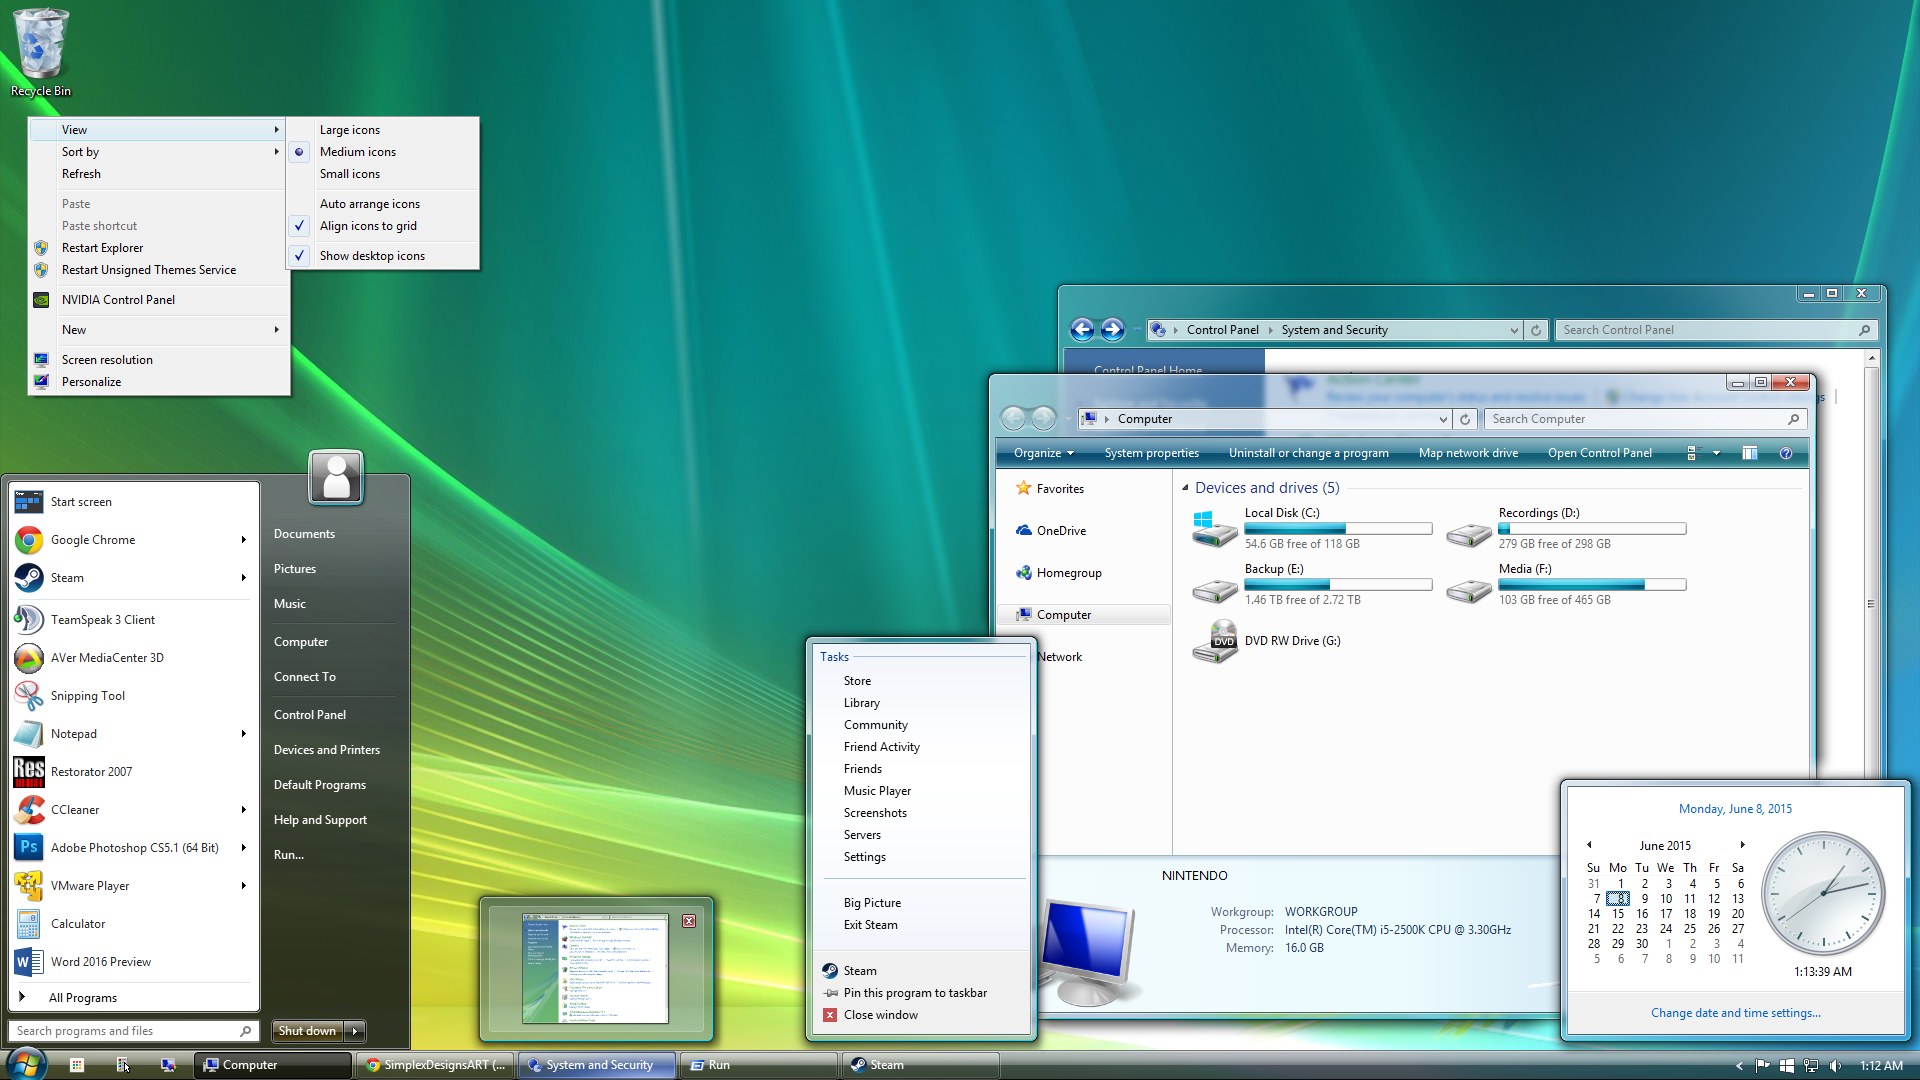 Windows Vista will soon be completely unsupported